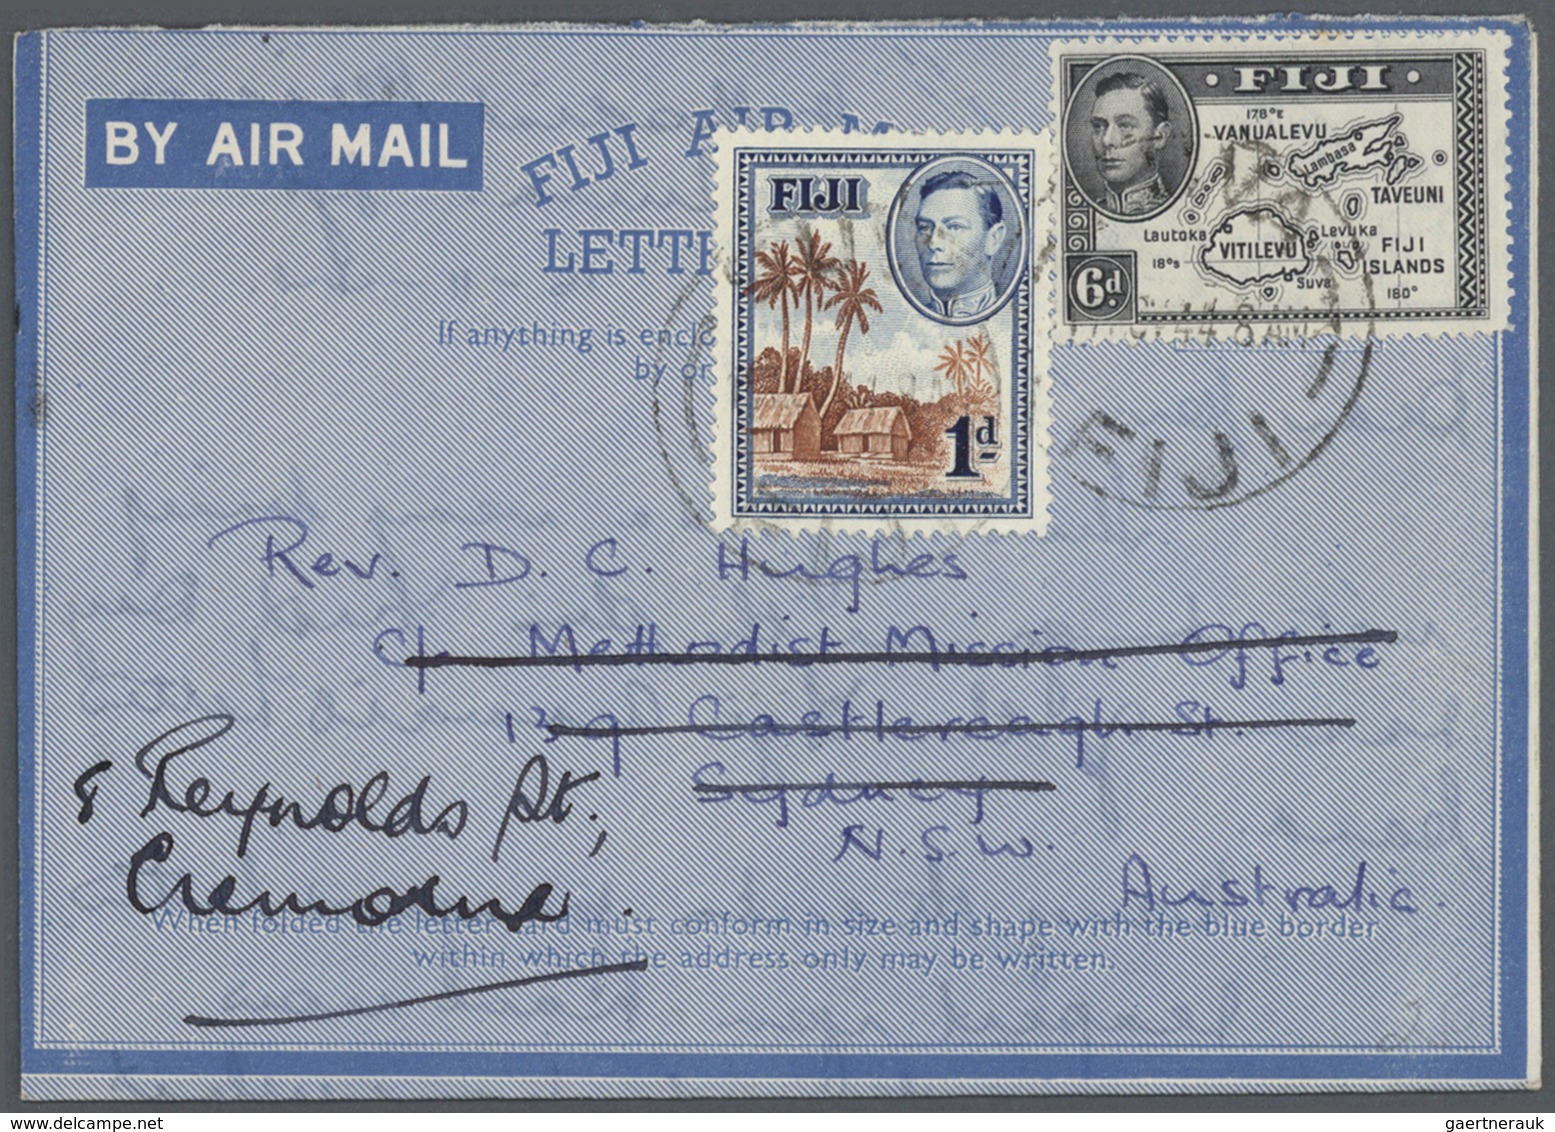 GA Fiji-Inseln: 1944/1990 (ca.), accumulation with about 540 unused and used/CTO airletters and AEROGRA